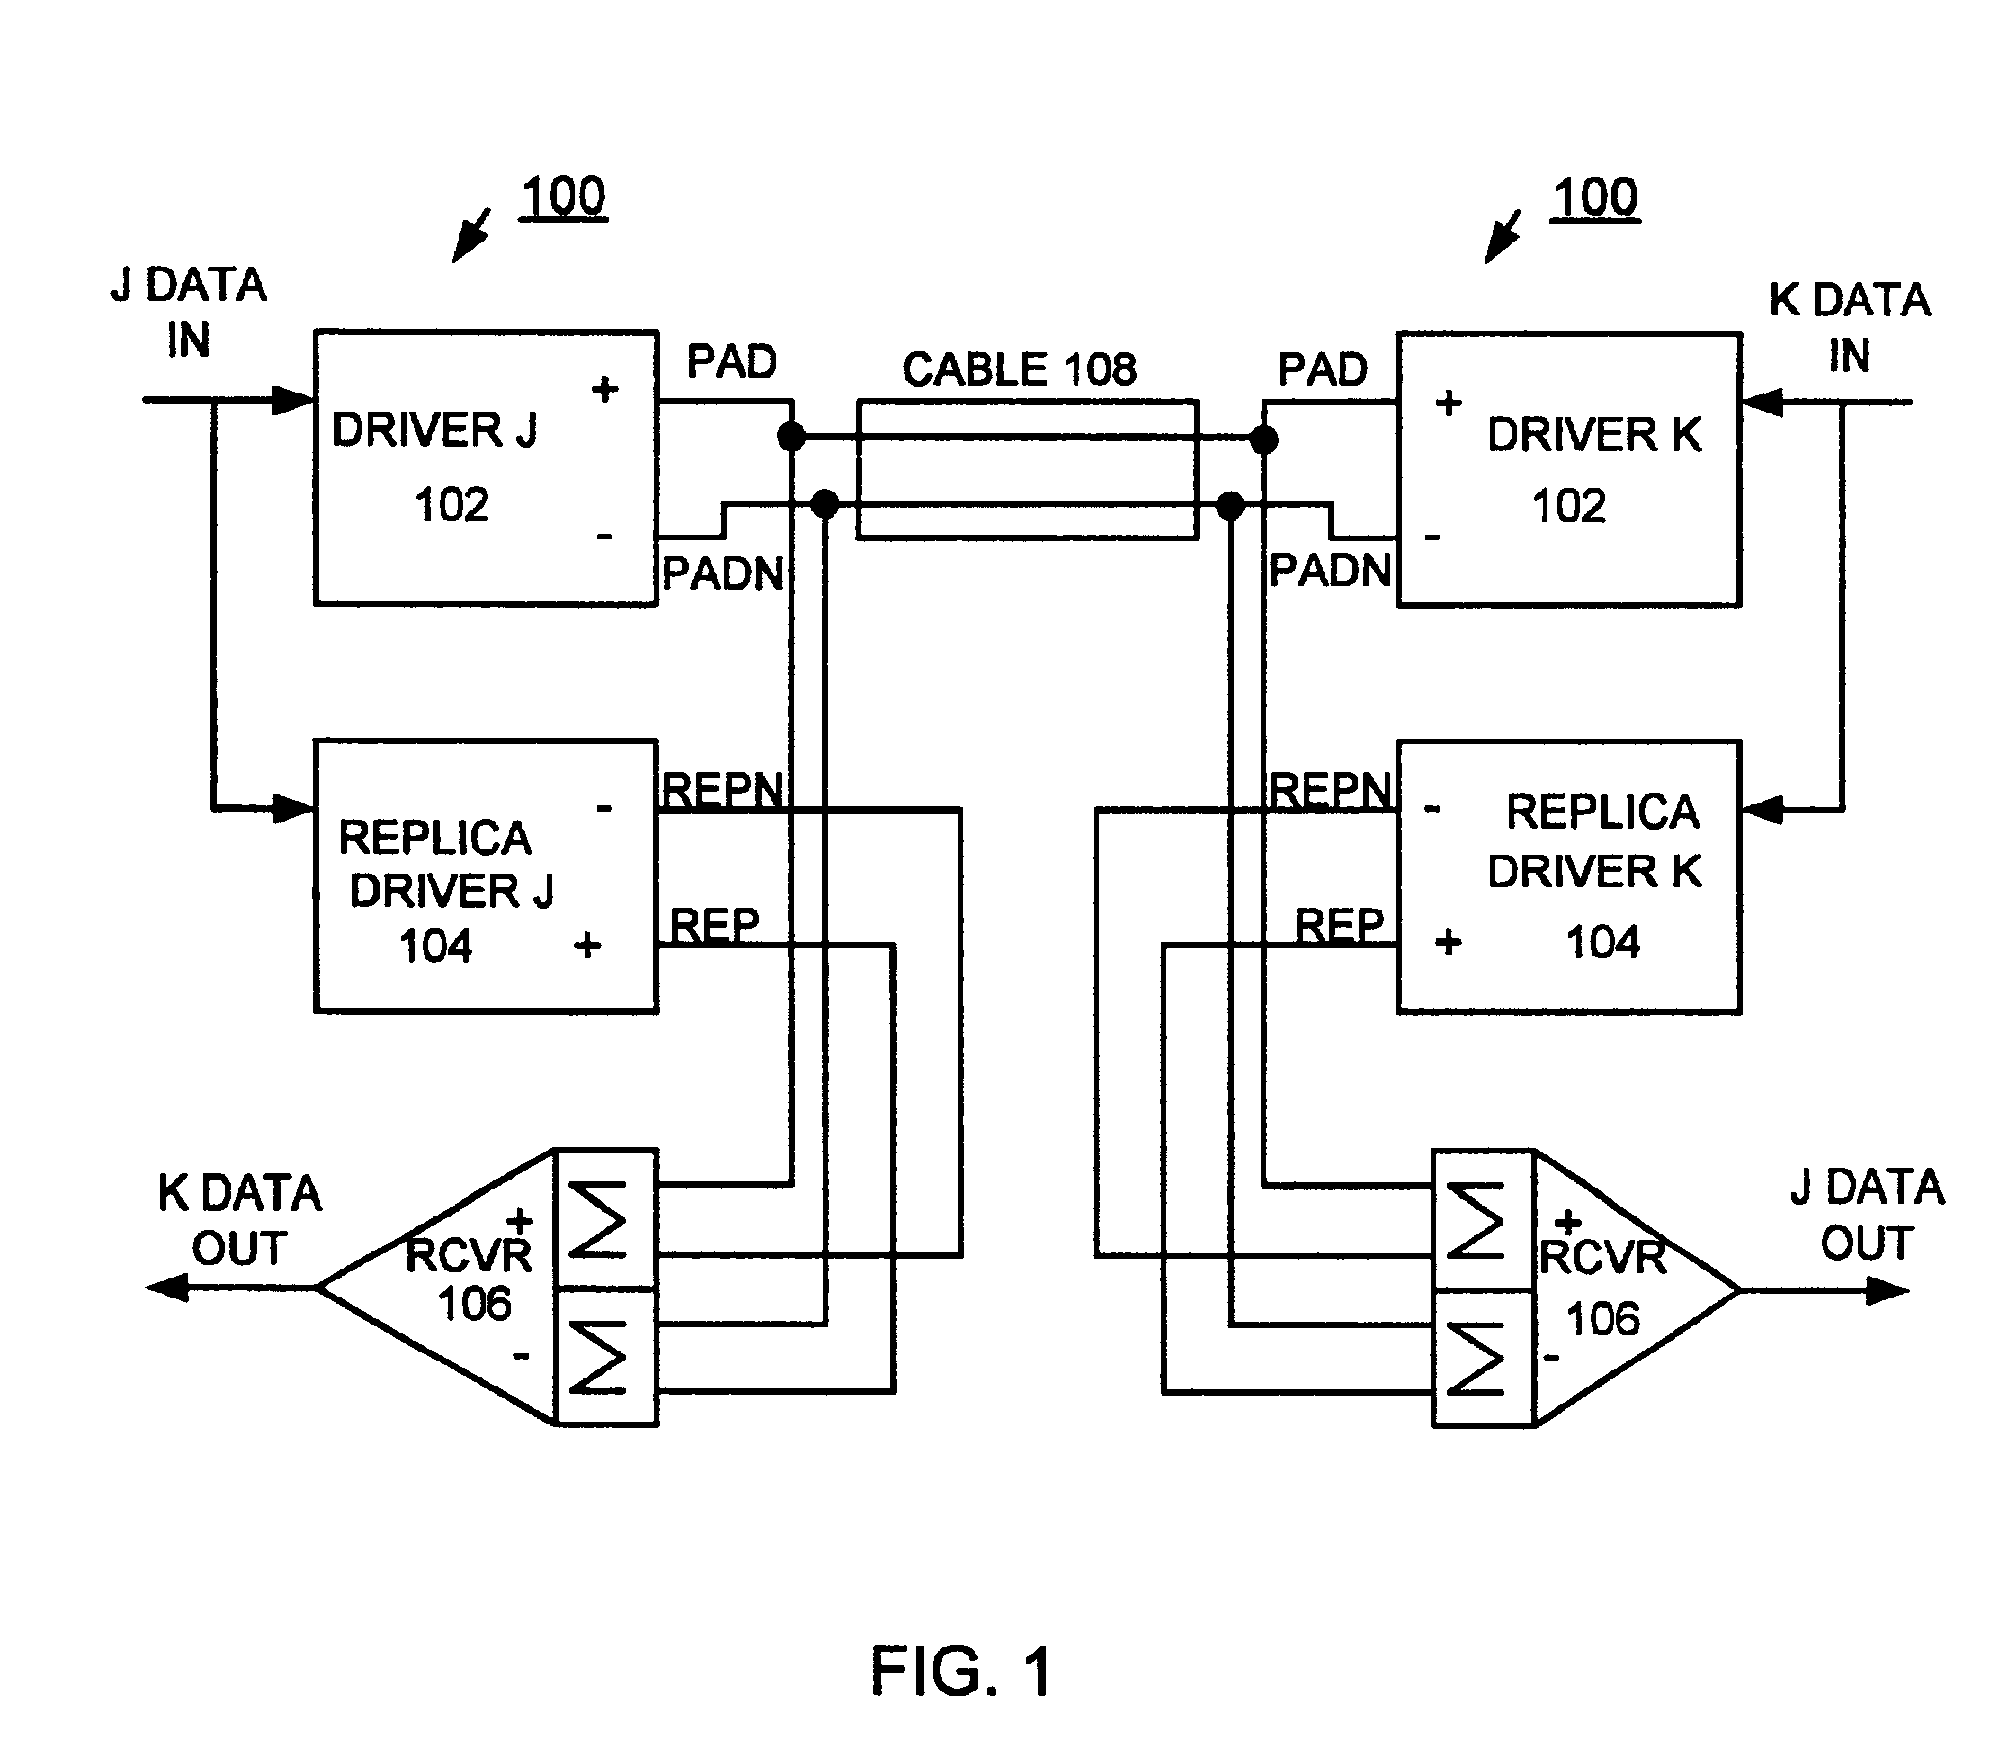 CMOS receiver for simultaneous bi-directional links